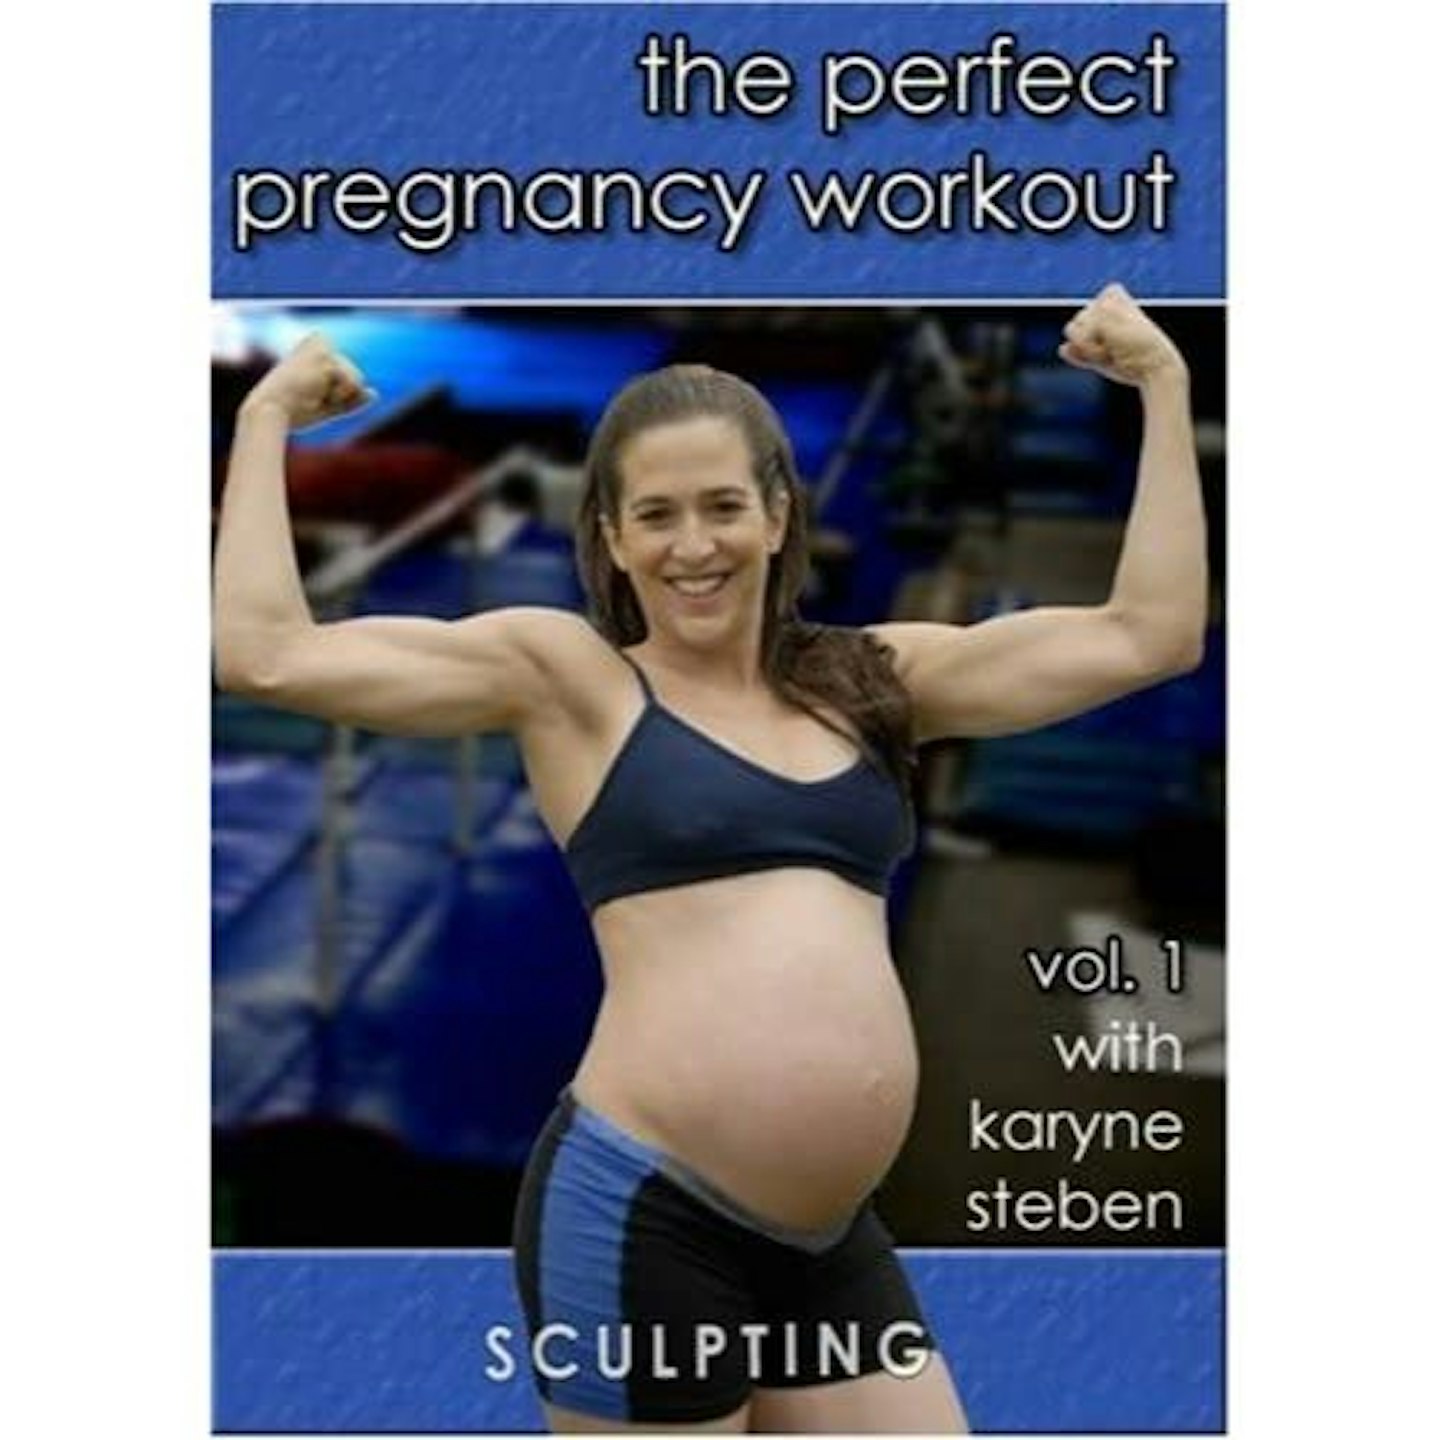 The Perfect Pregnancy Workout vol. 1 (2002)